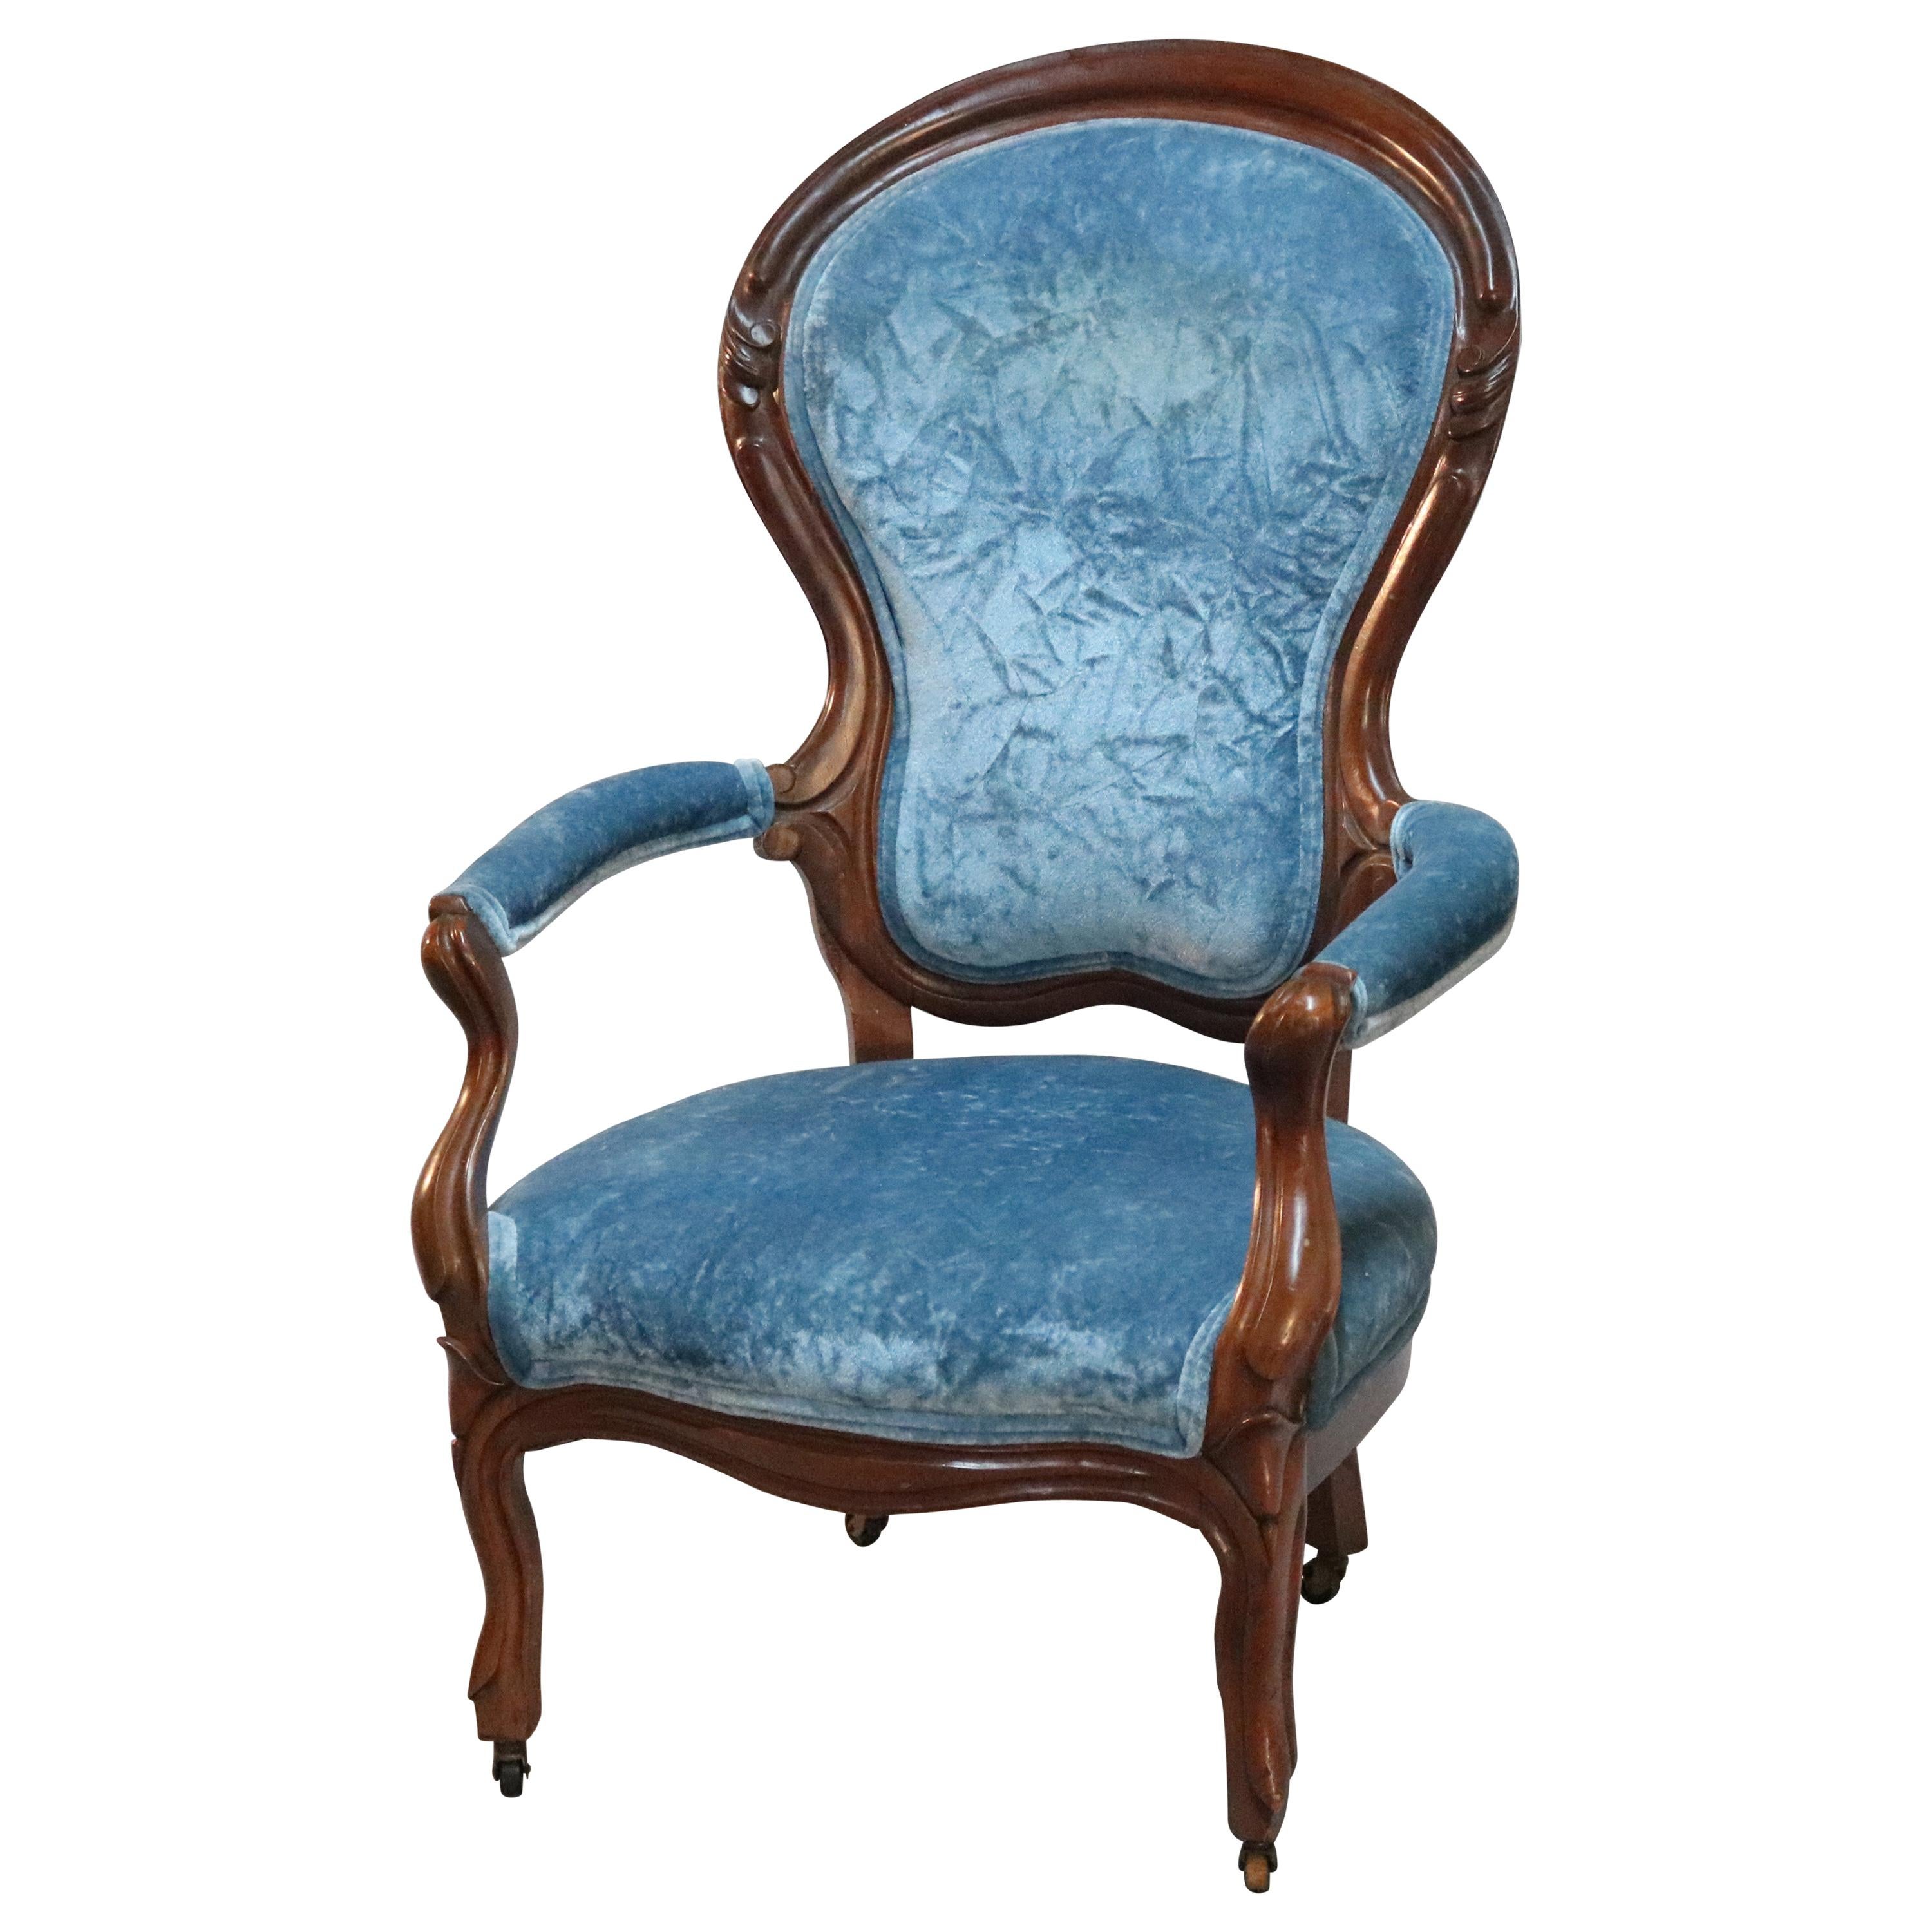 Antique Victorian Carved Walnut Upholstered Gentleman's Parlor Armchair